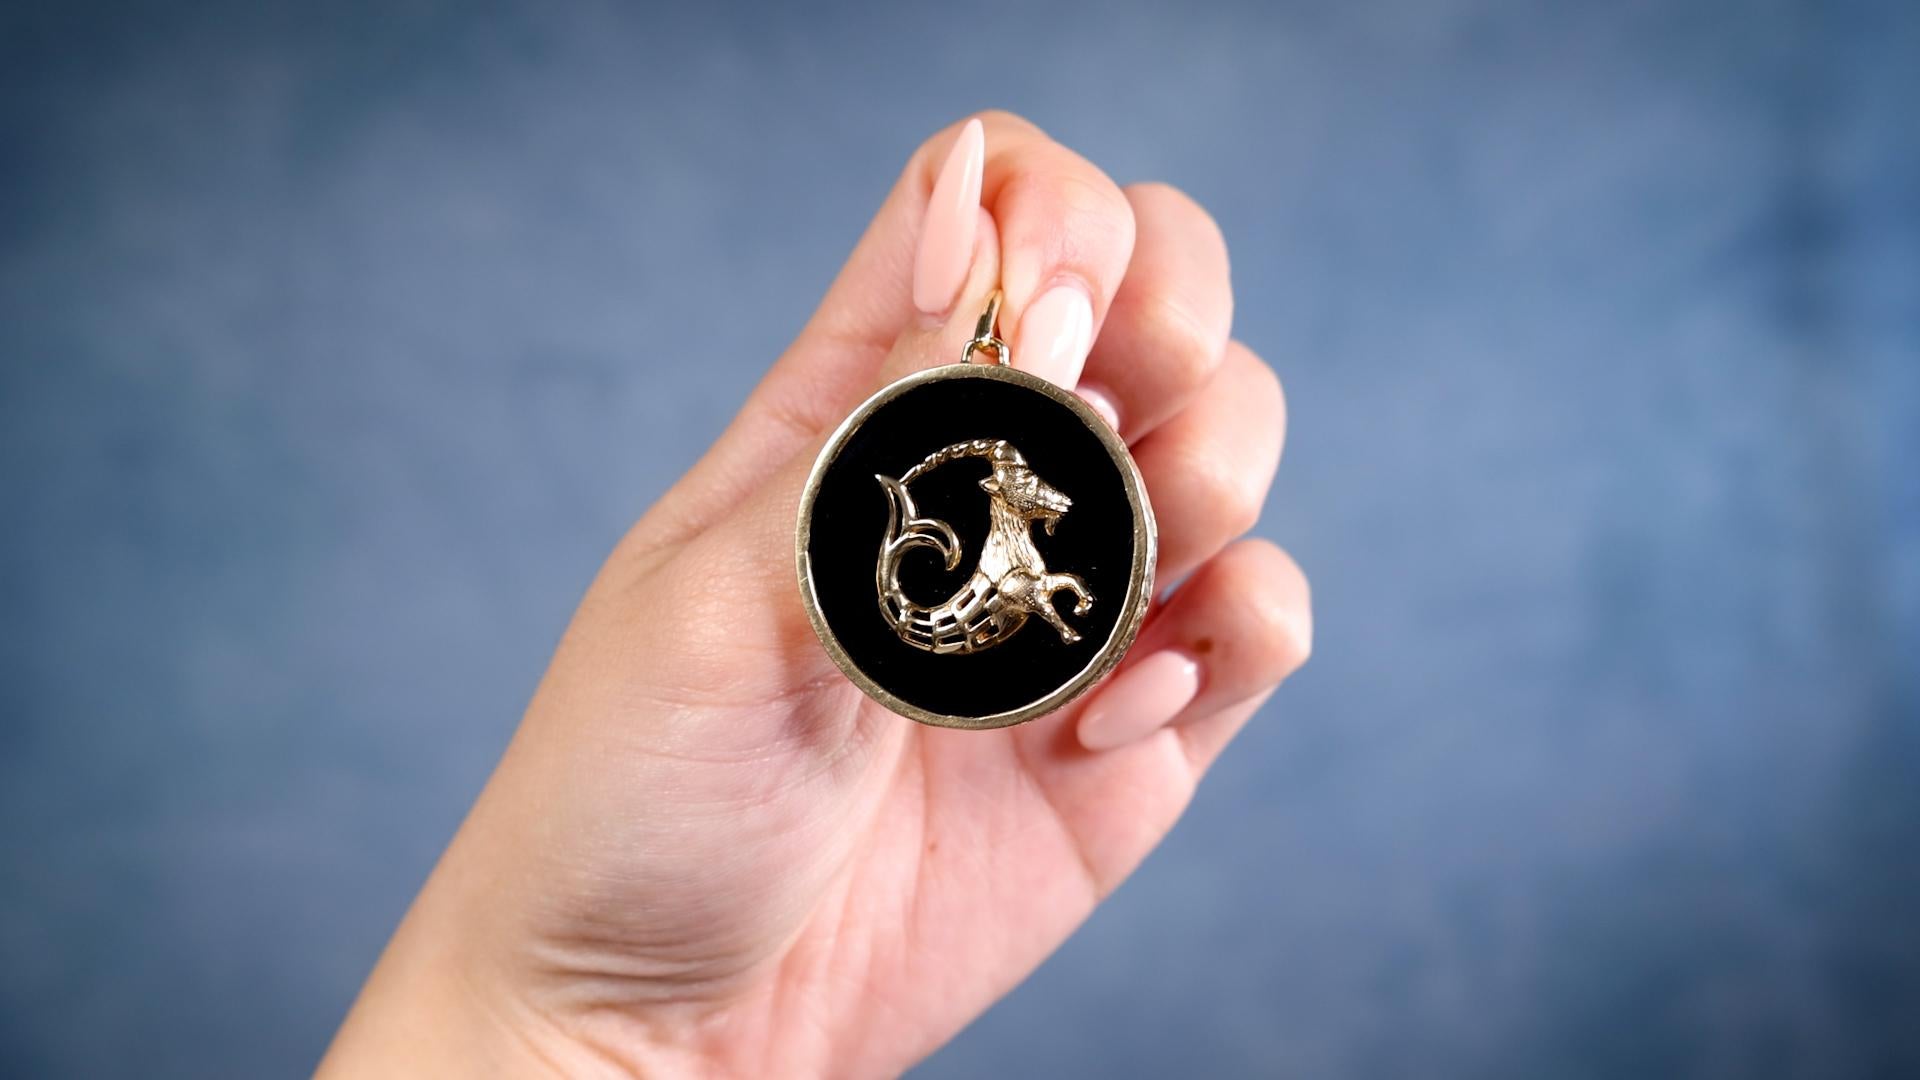 One Vintage Onyx 14k Yellow Gold Capricorn Zodiac Pendant. Featuring polished onyx. Crafted in 14 karat yellow gold. Circa 1970. The pendant measures 2 ⅞ inches in length by 1 ⅜ inches in width.     

About this Item: This timeless pendant channels